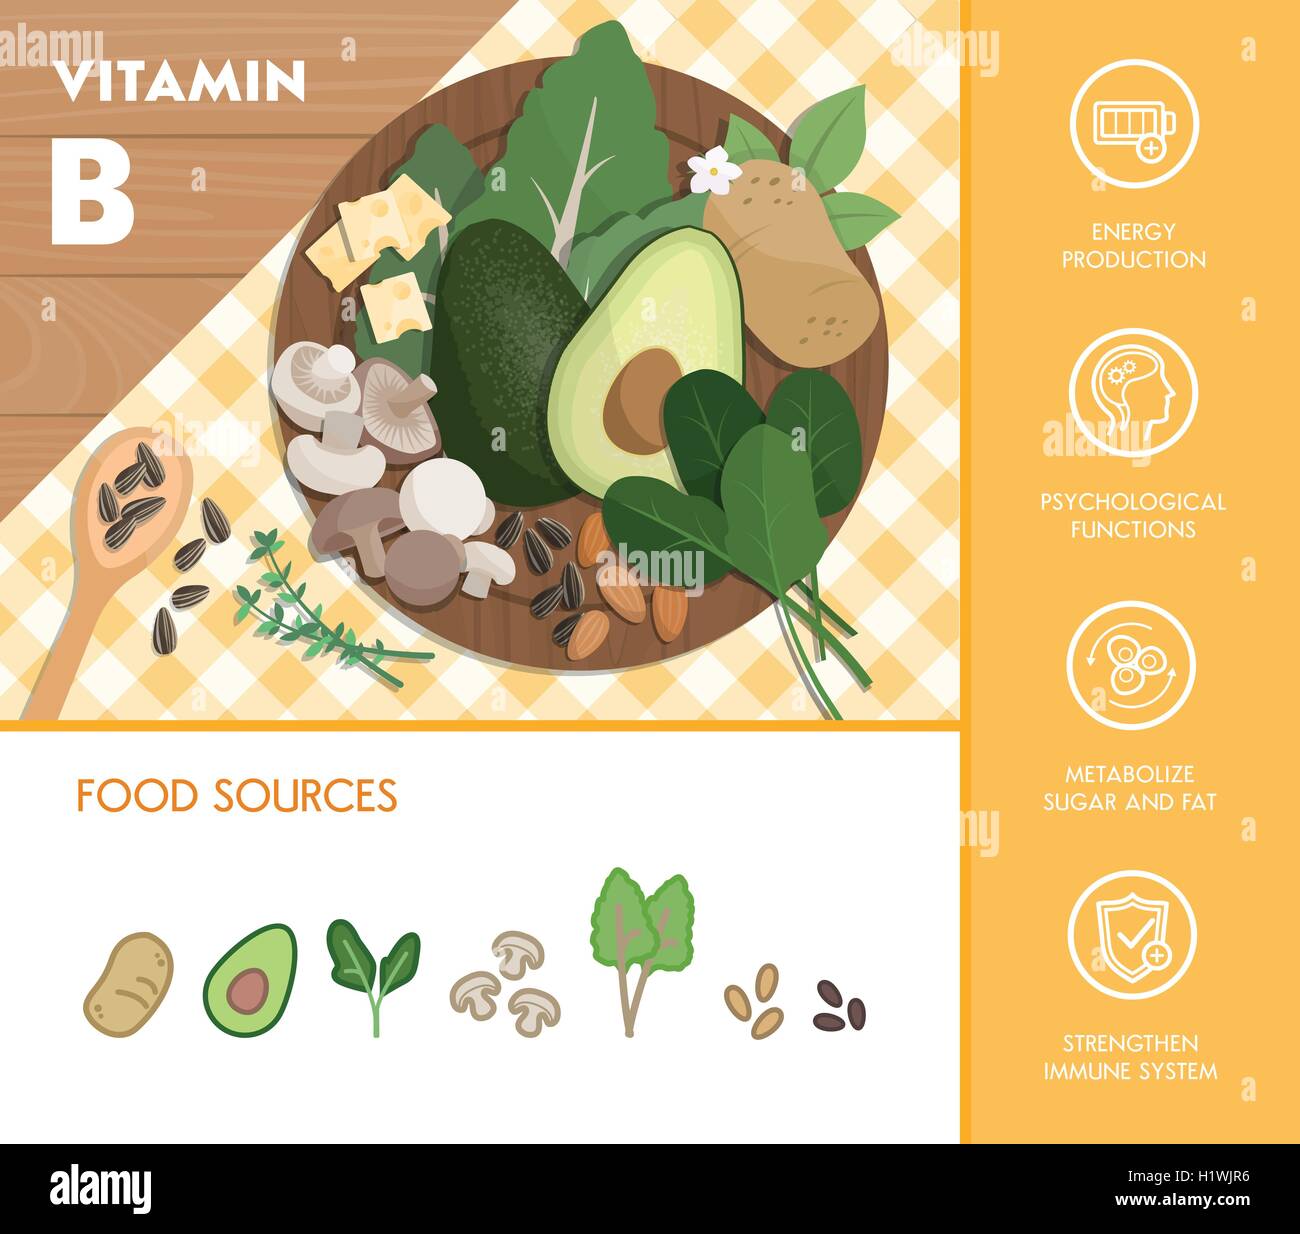 Vitamin B complex food sources and health benefits, vegetables and fruit composition on a chopping board and icons set Stock Vector